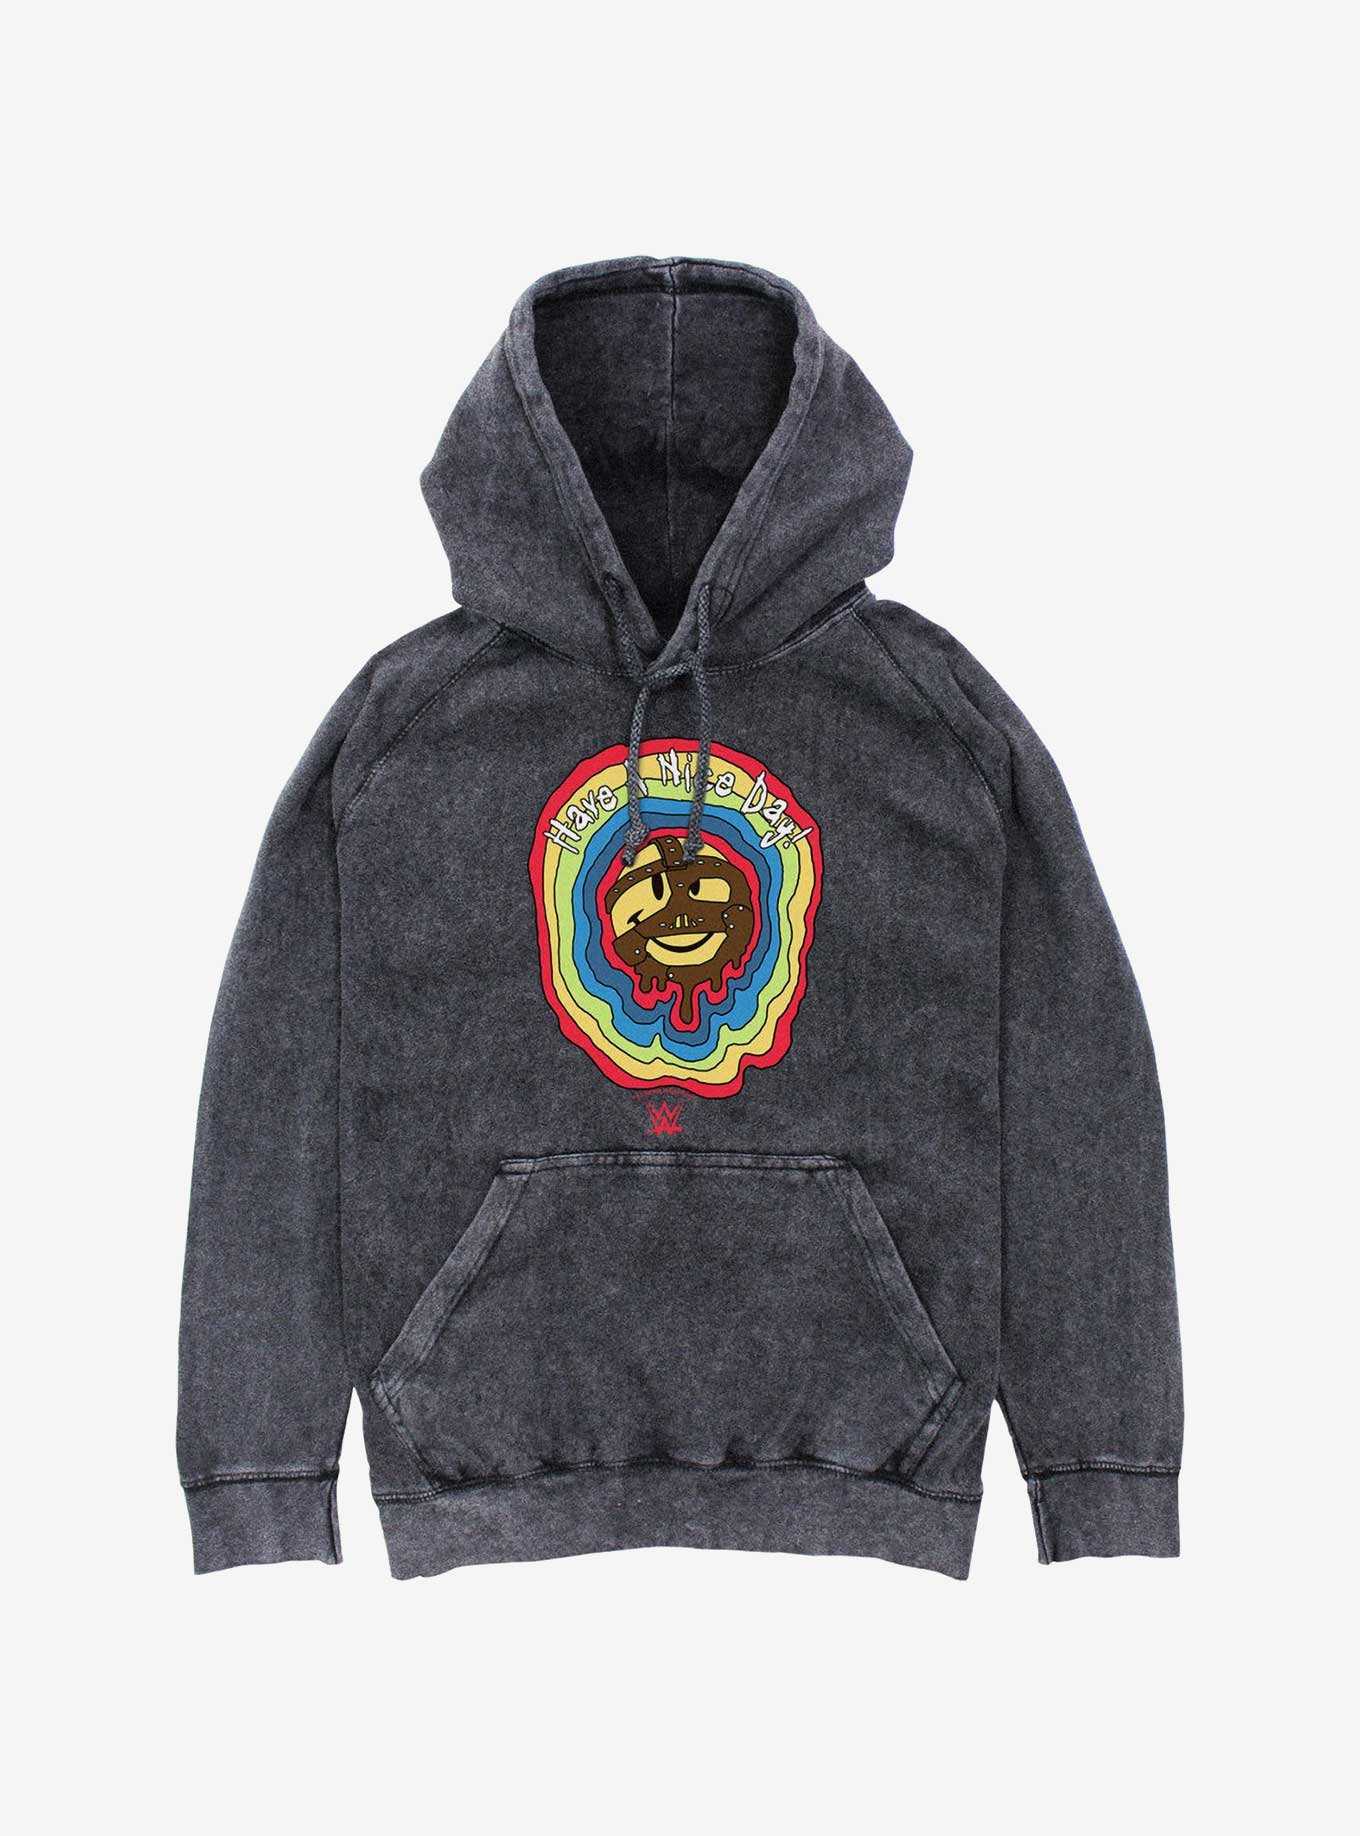 WWE Mick Foley Mankind Have A Nice Day! Mineral Wash Hoodie, , hi-res